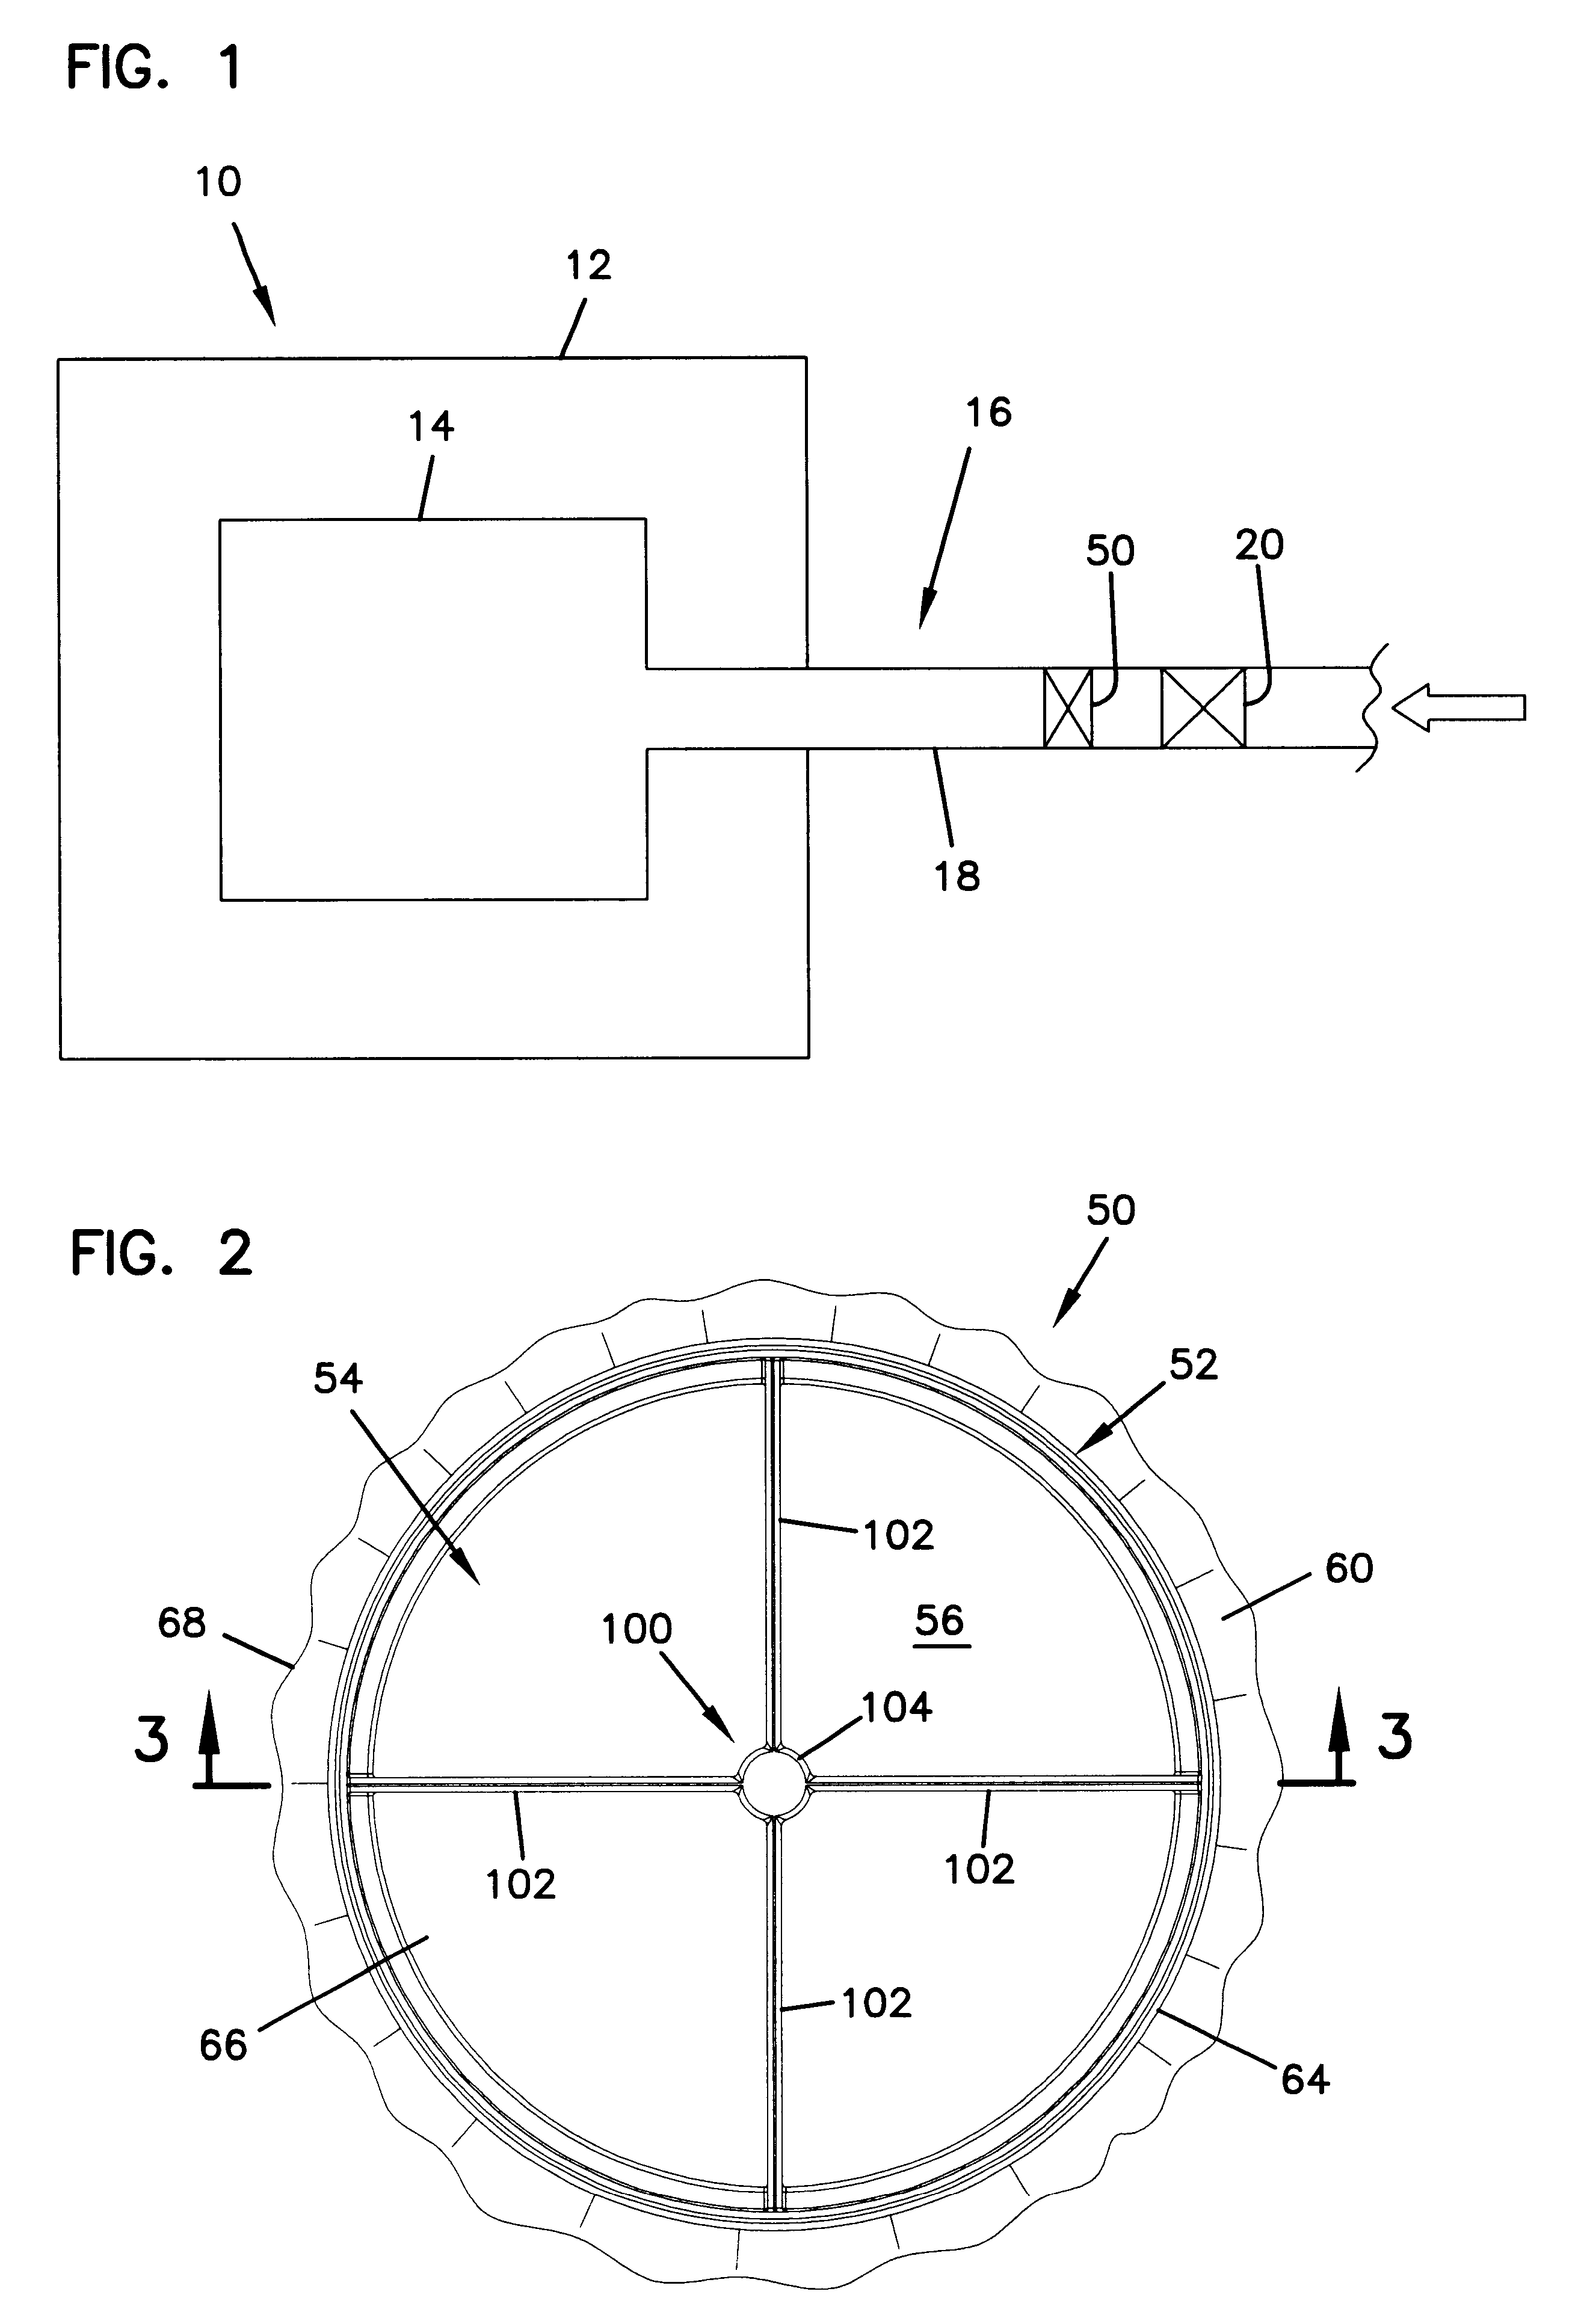 Filter element and methods